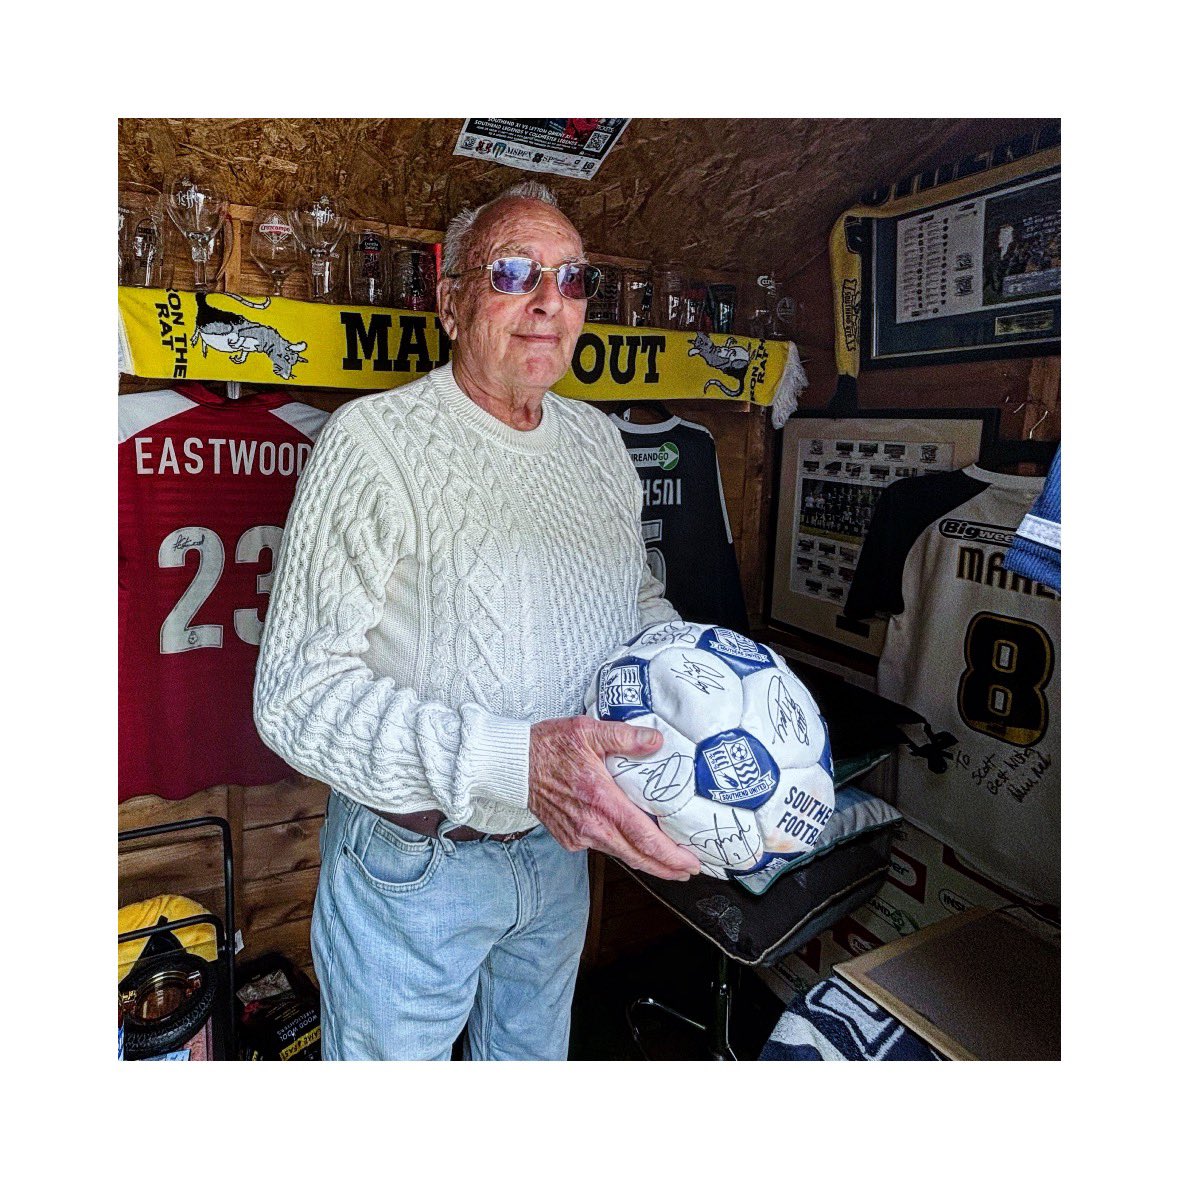 My Dad popped round to see the Shrimpers Shed today, he found a deflated flat signed ball, but this photo means everything. 

He introduced me to it all, it’s all his fault 😂🦐❤️